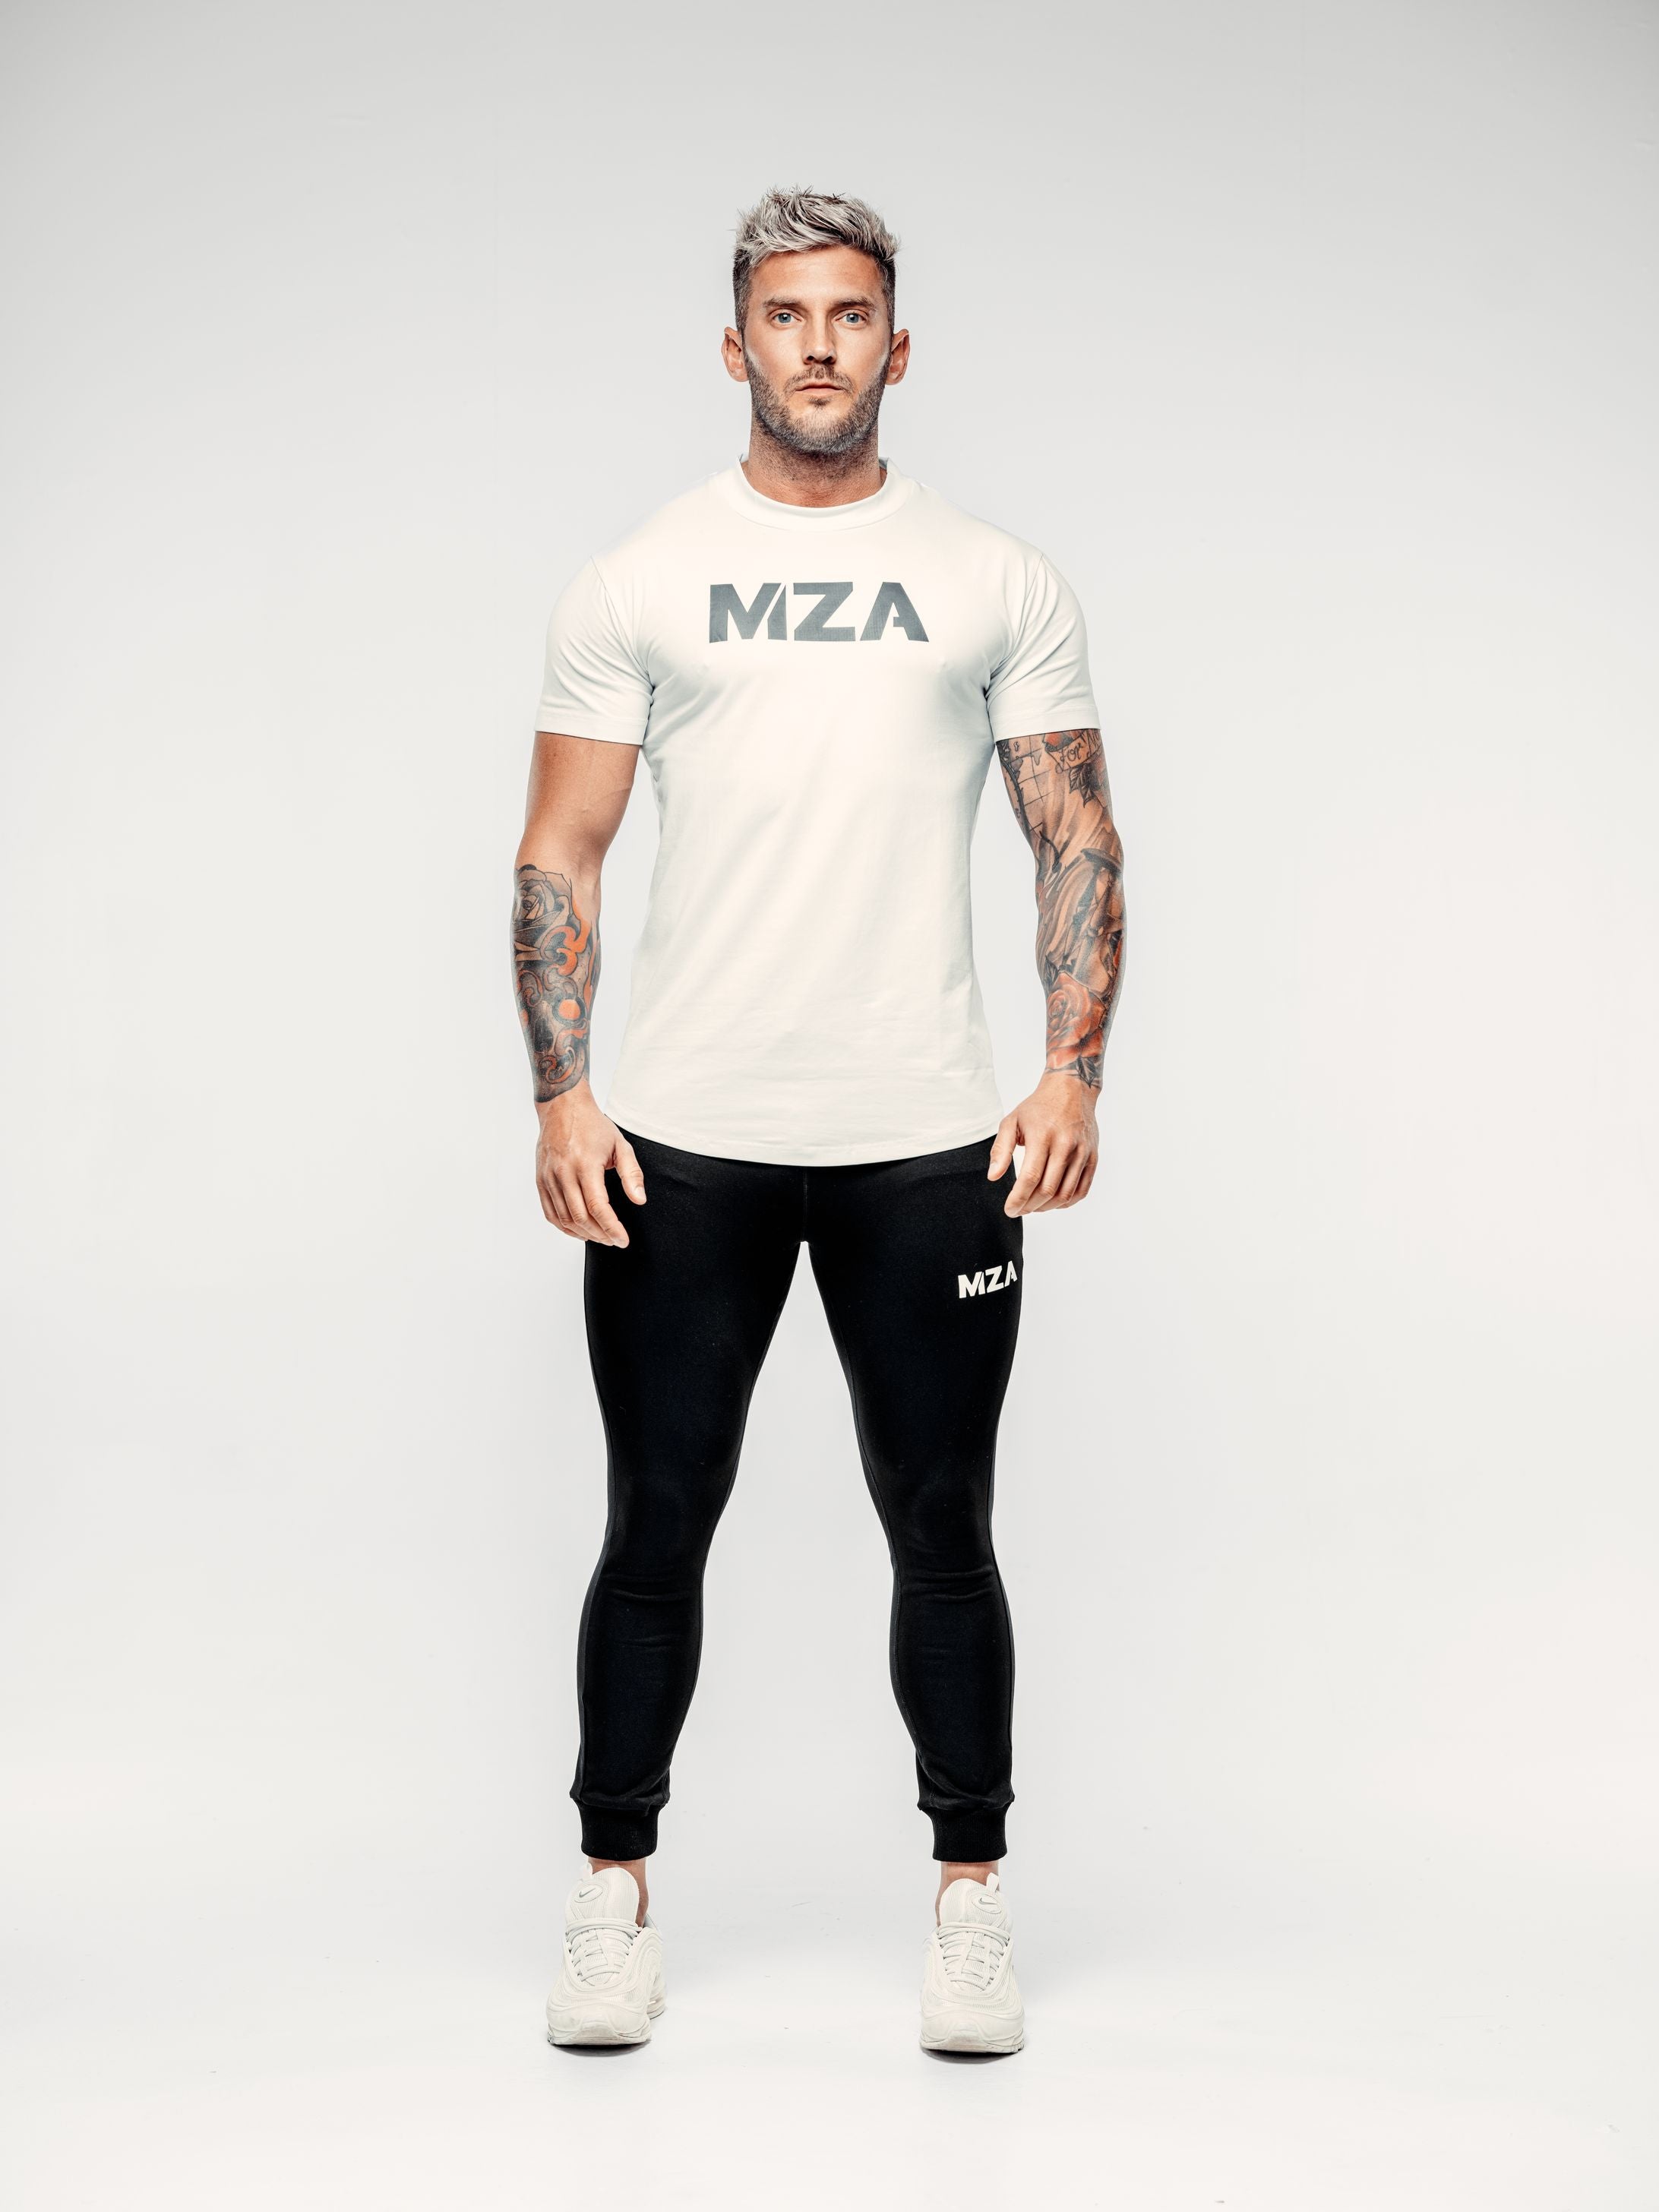 This is a full body shot of shane wearing the new standard long line t shirt in white paired with the new standard joggers in black. Shane is facing the camera with his hands by his sides